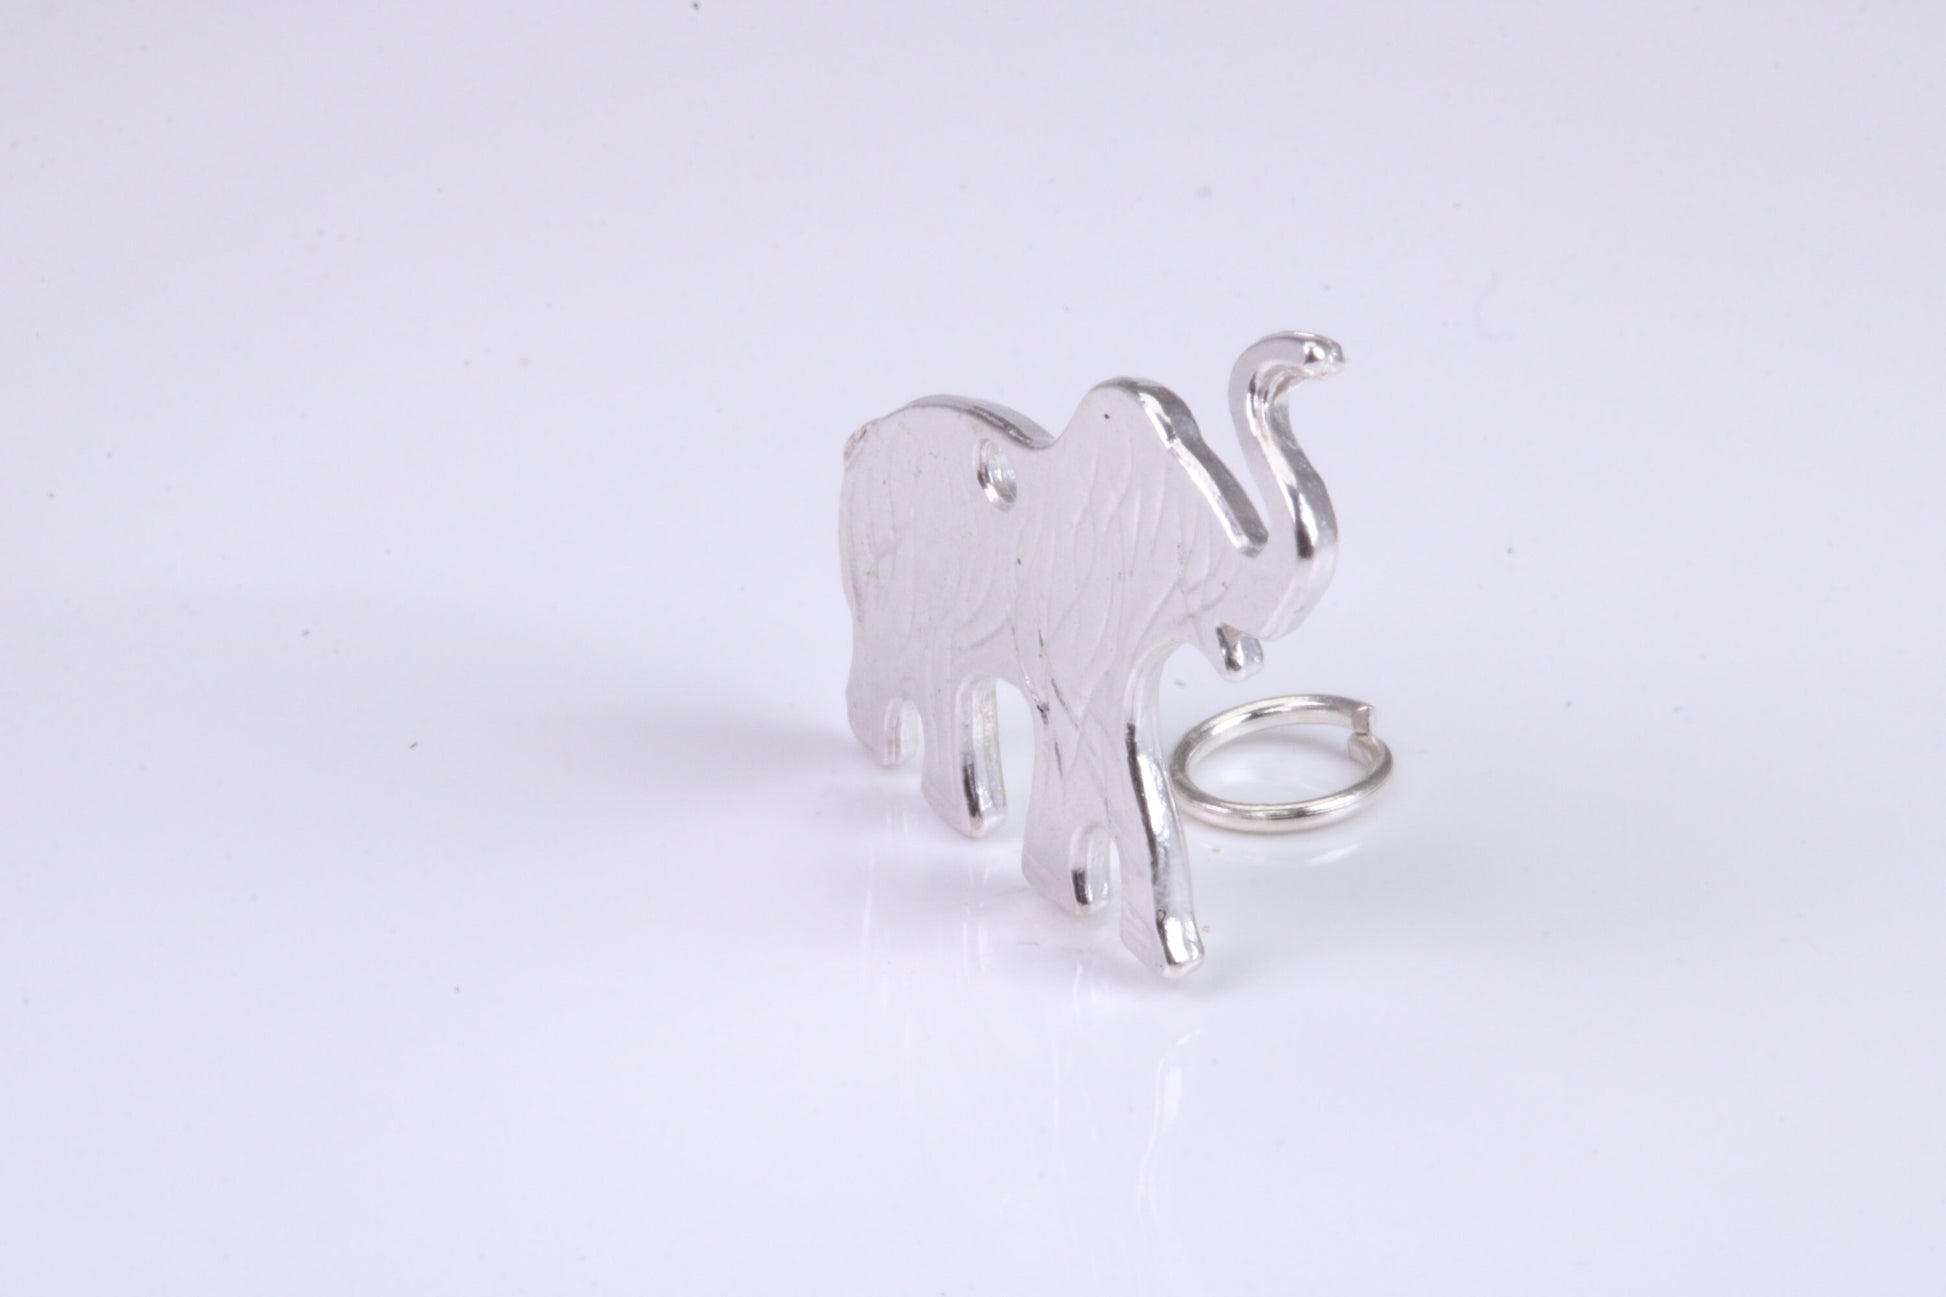 African Elephant Charm, Traditional Charm, Made from Solid 925 Grade Sterling Silver, Complete with Attachment Link